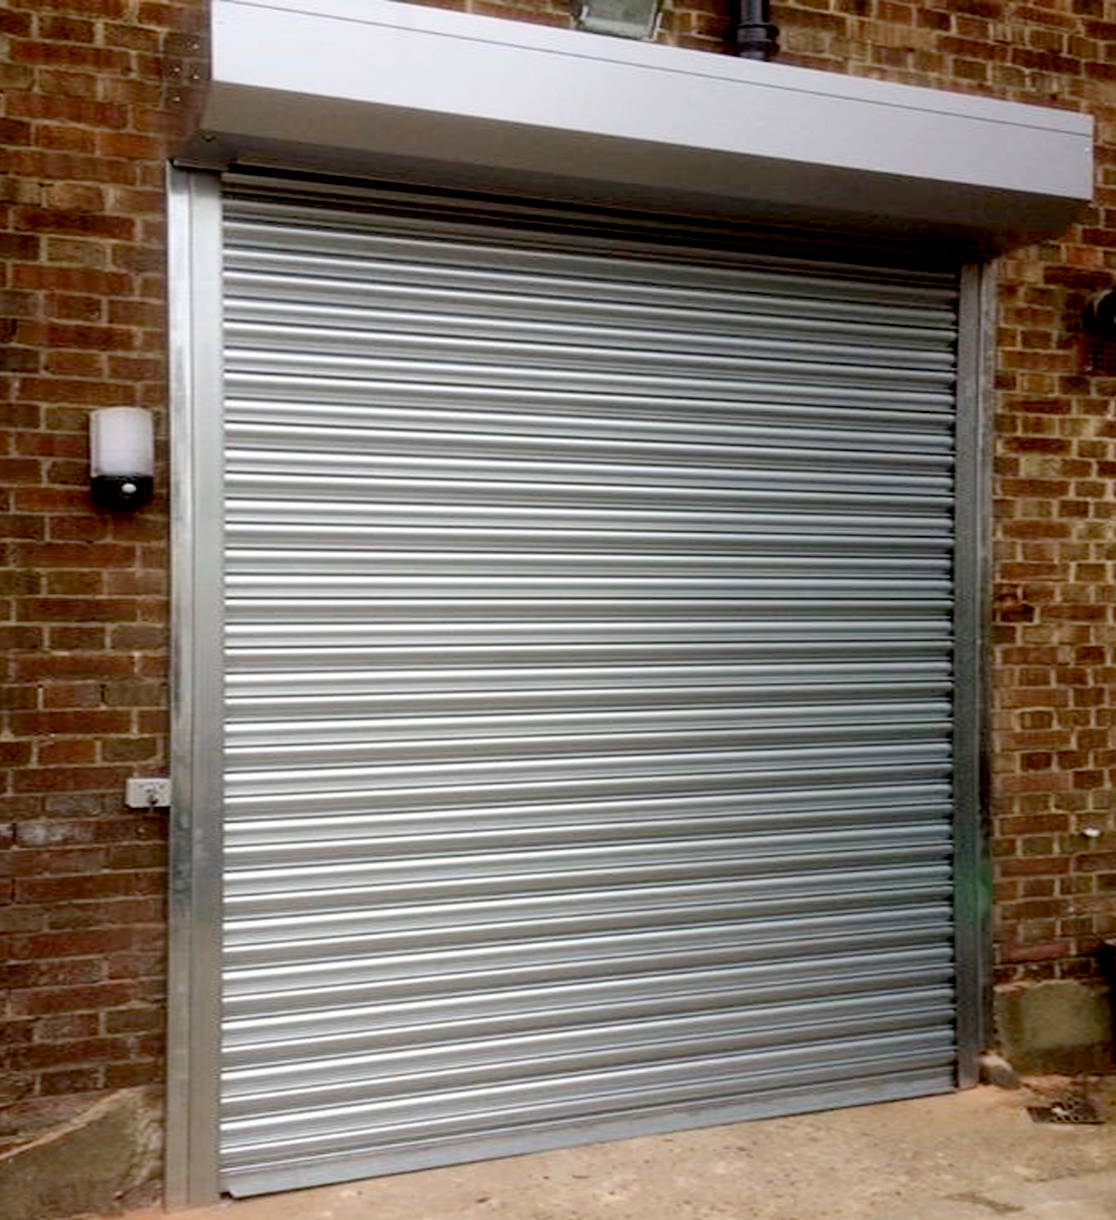 What is an automatic shutter gate? Why is it important for factories?